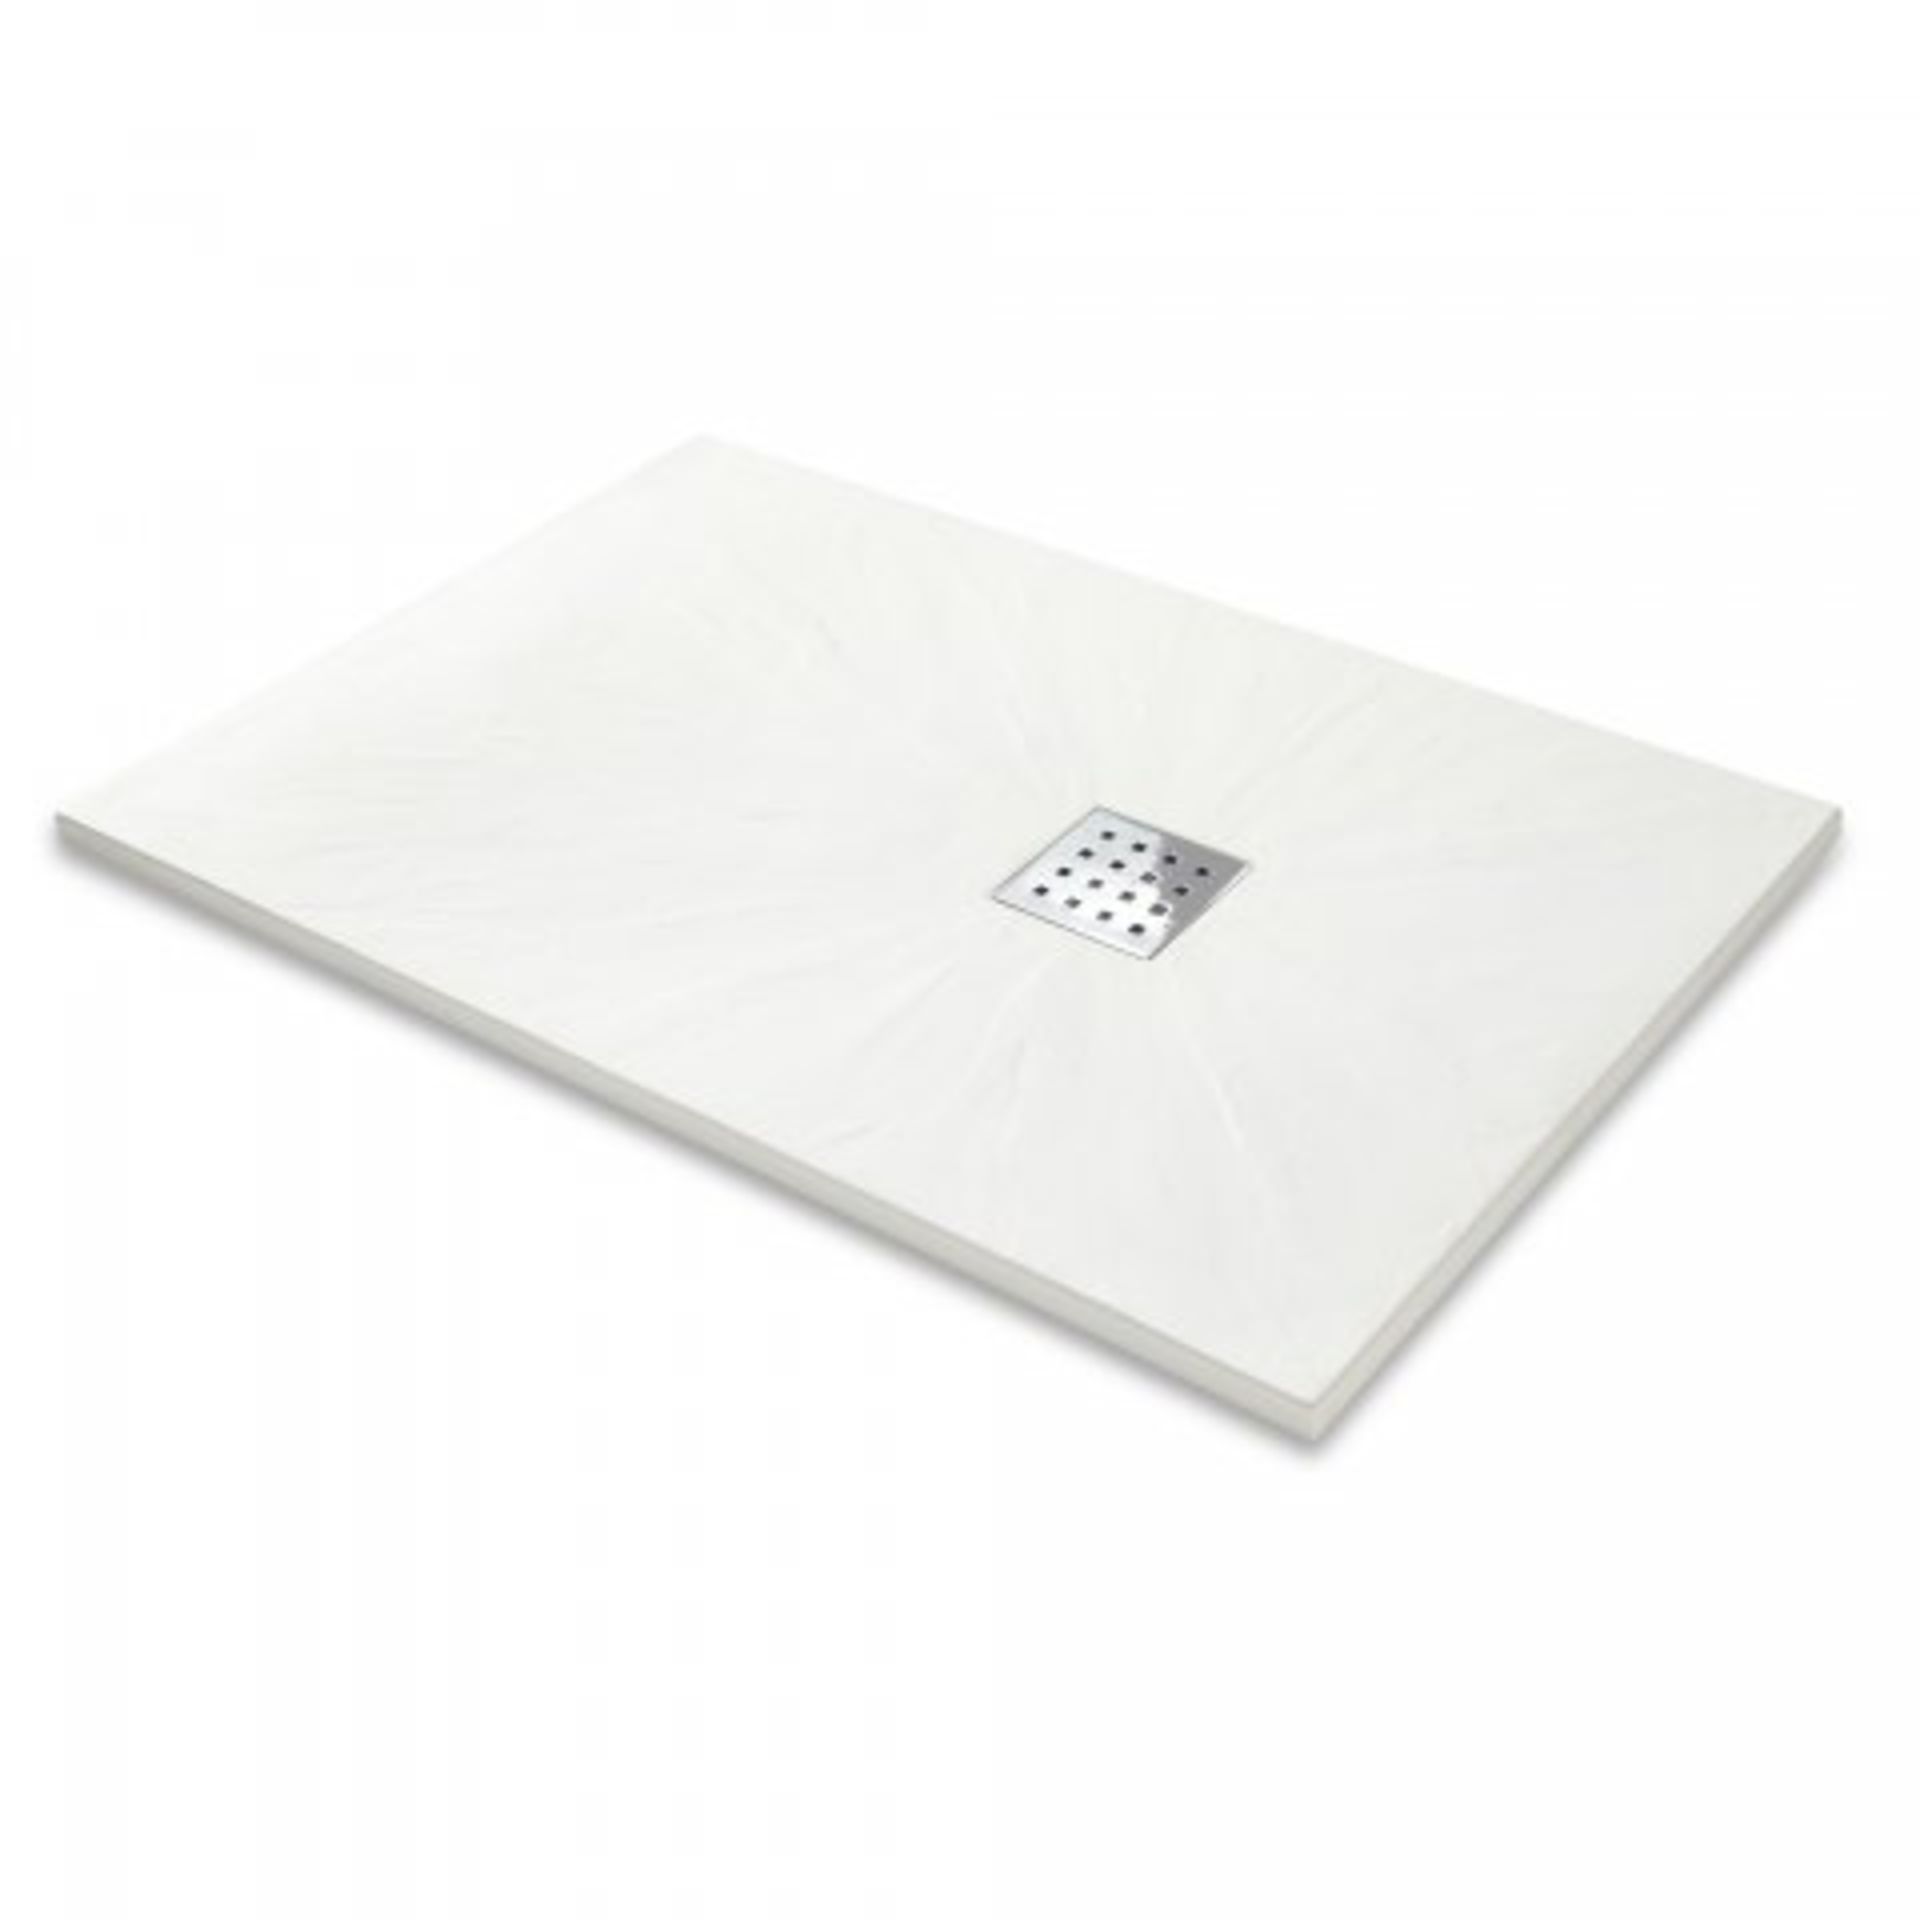 NEW 1200x800mm Rectangular White Slate Effect Shower Tray & Chrome Waste. RRP £549.99.Hand cra... - Image 2 of 3